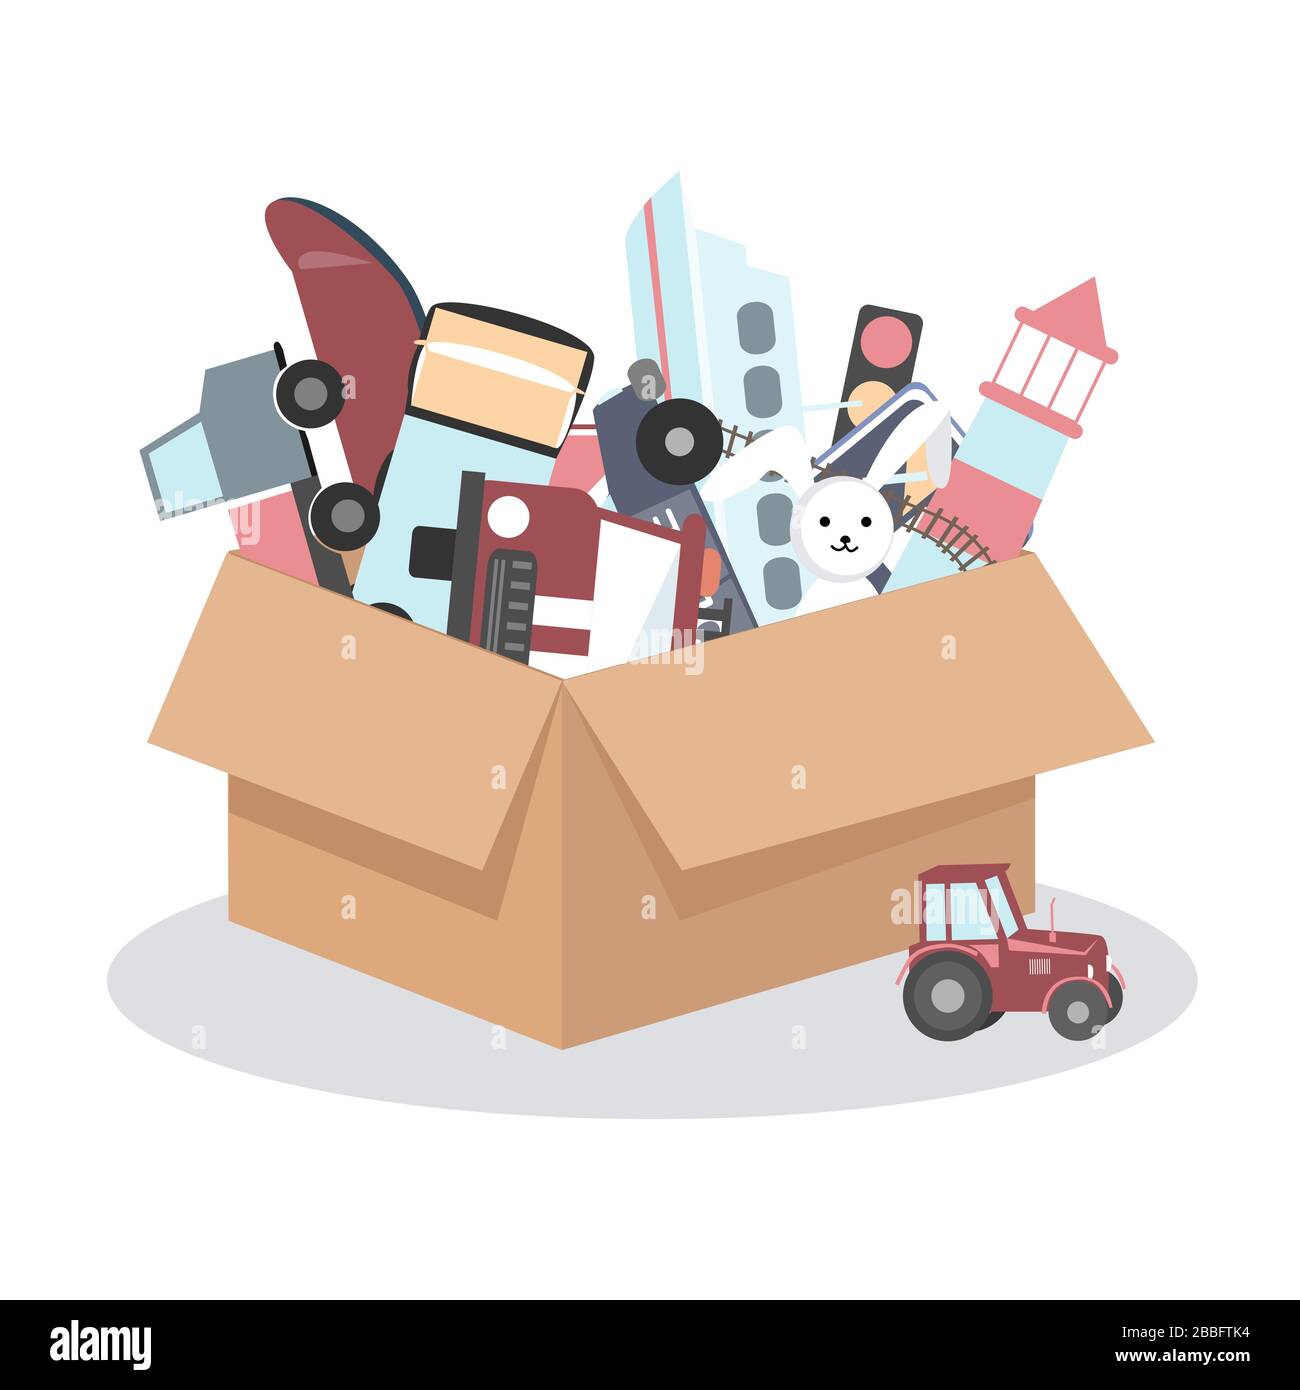 Cardboard box with kids toys on a white background. Vector illustration. Room organization or charity concept Stock Vector